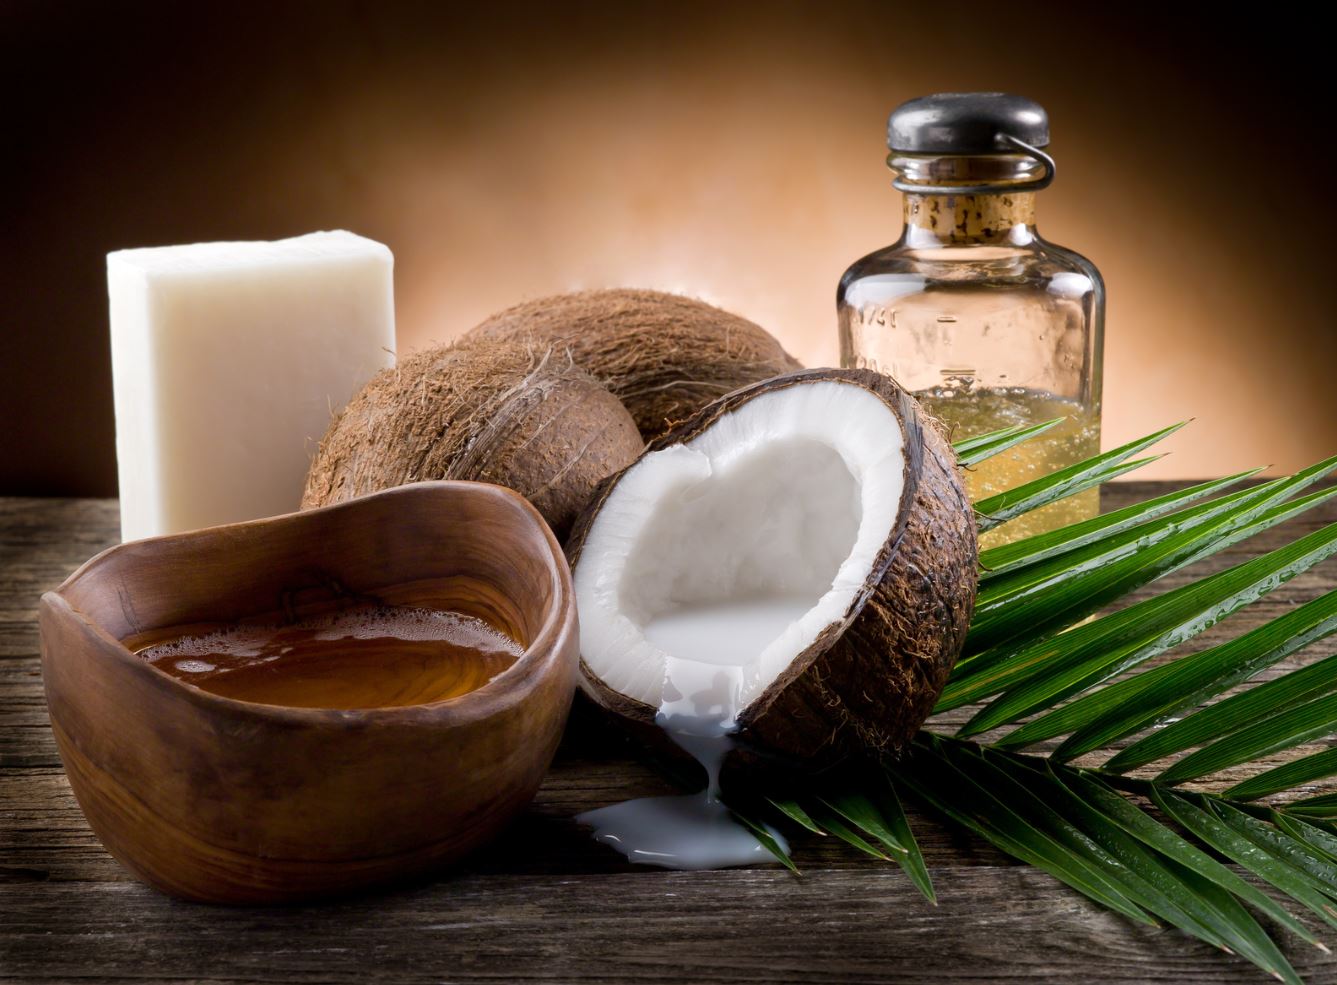 COCONUT OIL: THE FOOD AND MEDICINE MIRACLE